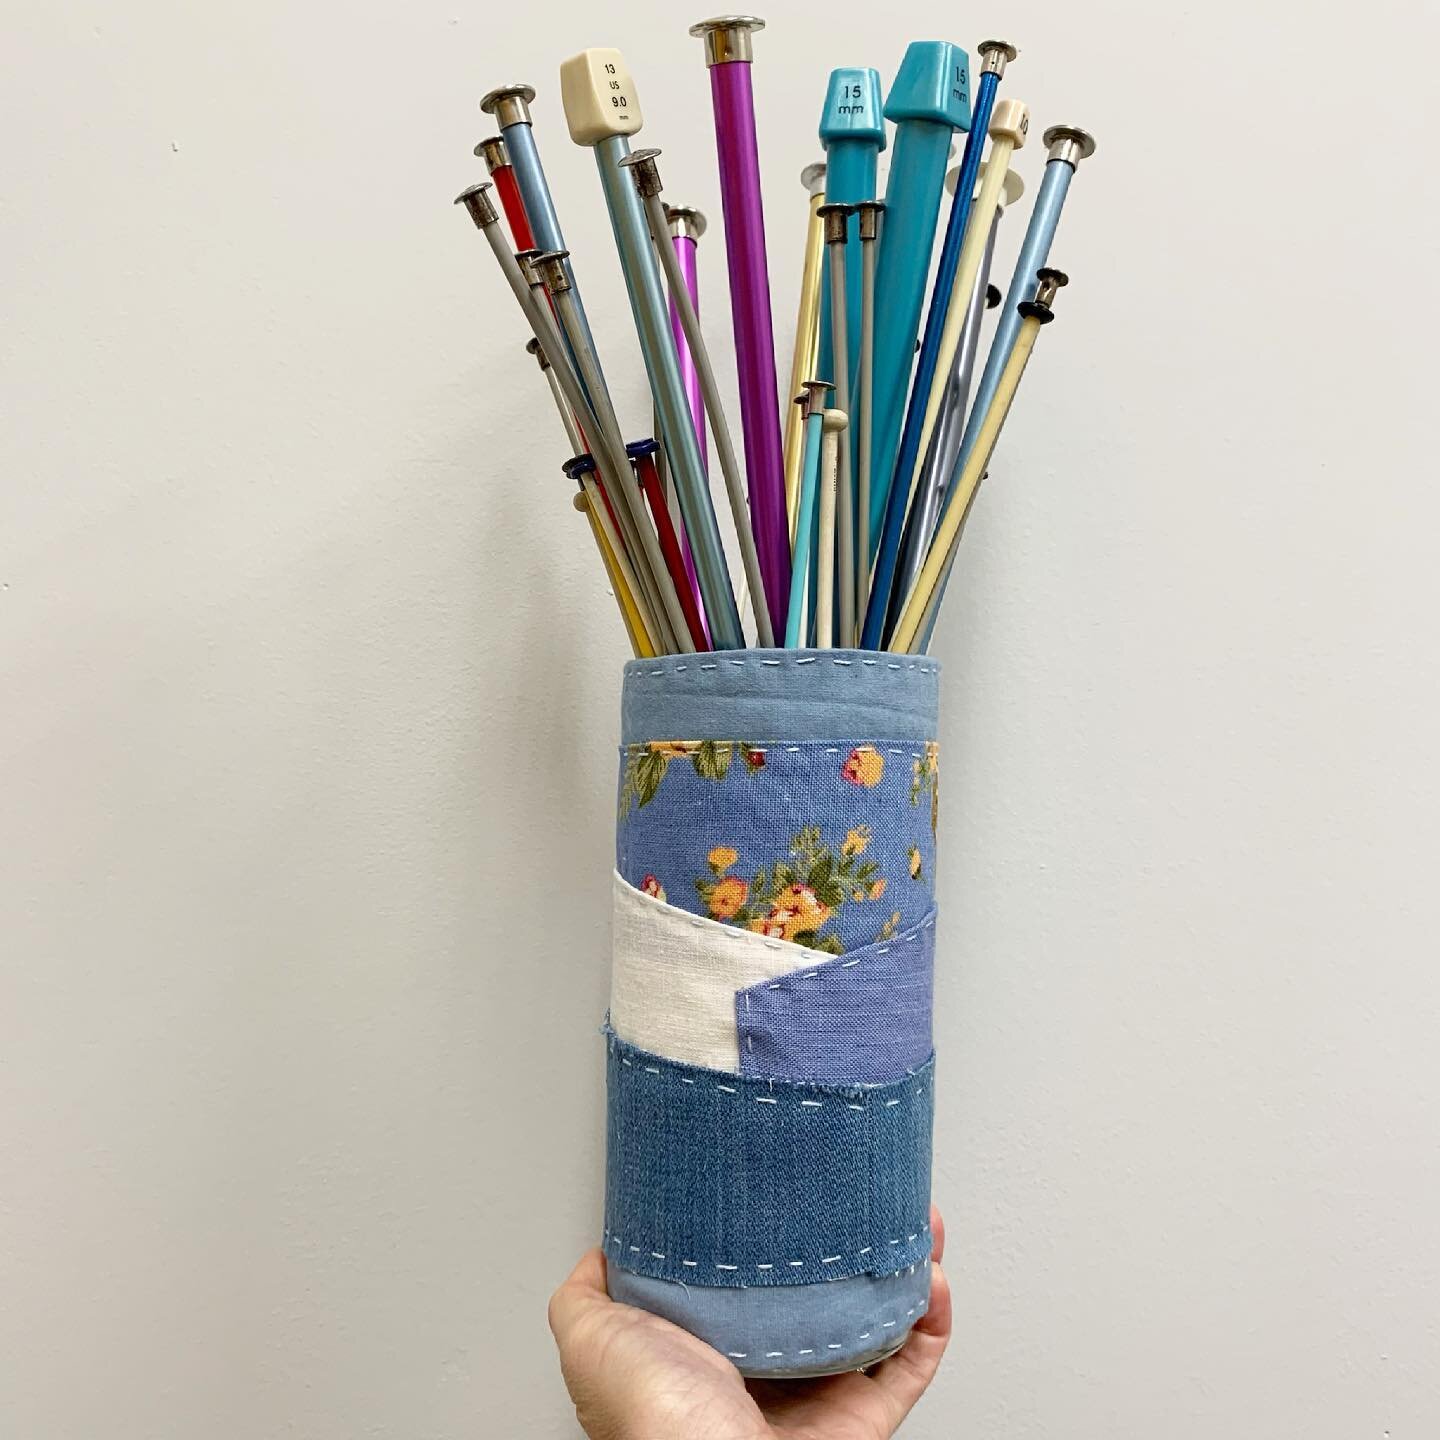 Anyone else store their knitting needles in old flower vases? 💐 This one just got cozy with some scrappy fabric! Thanks for the fun soft sculpture idea, @heidi.parkes! 💙
.
.
.
.
#zerowaste #scrapfabric #handstitching #knittingneedles #patchwork #qu